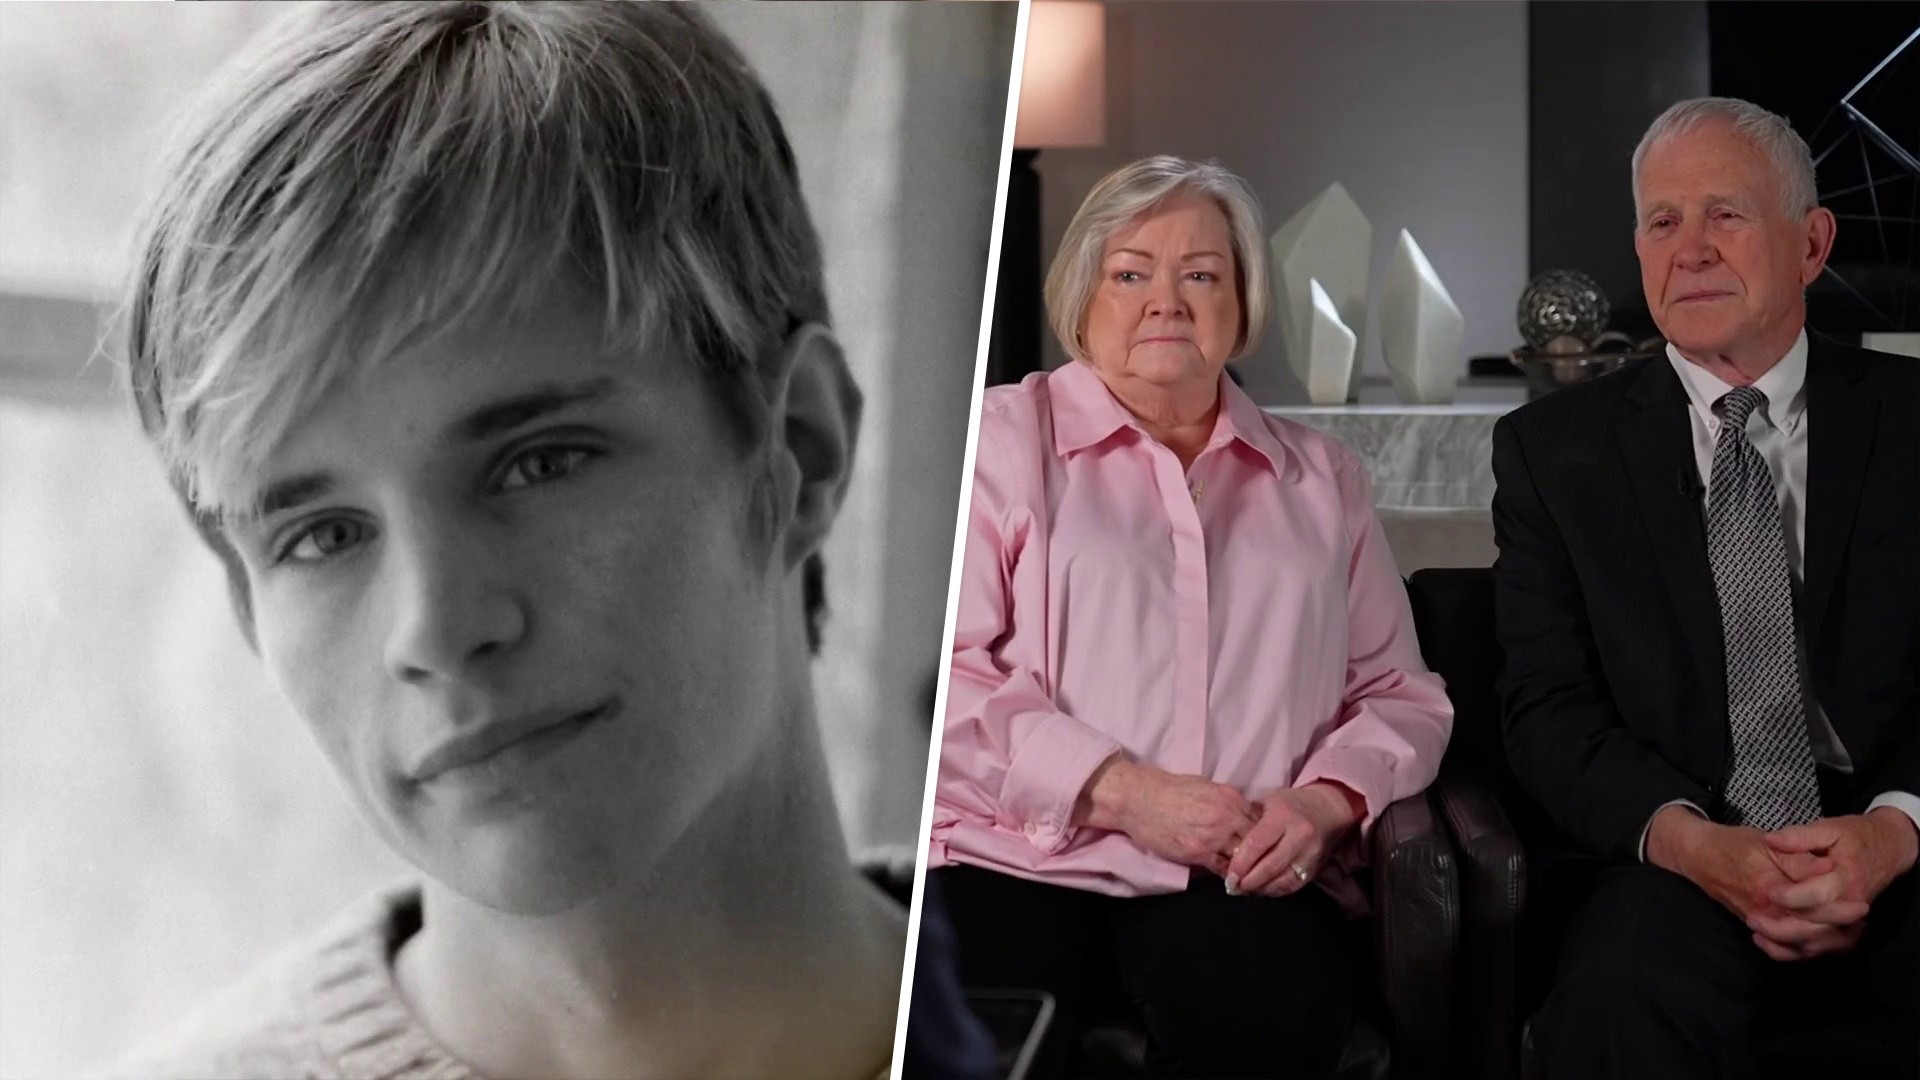 Matthew Shepard's parents reflect on 25 years since his death